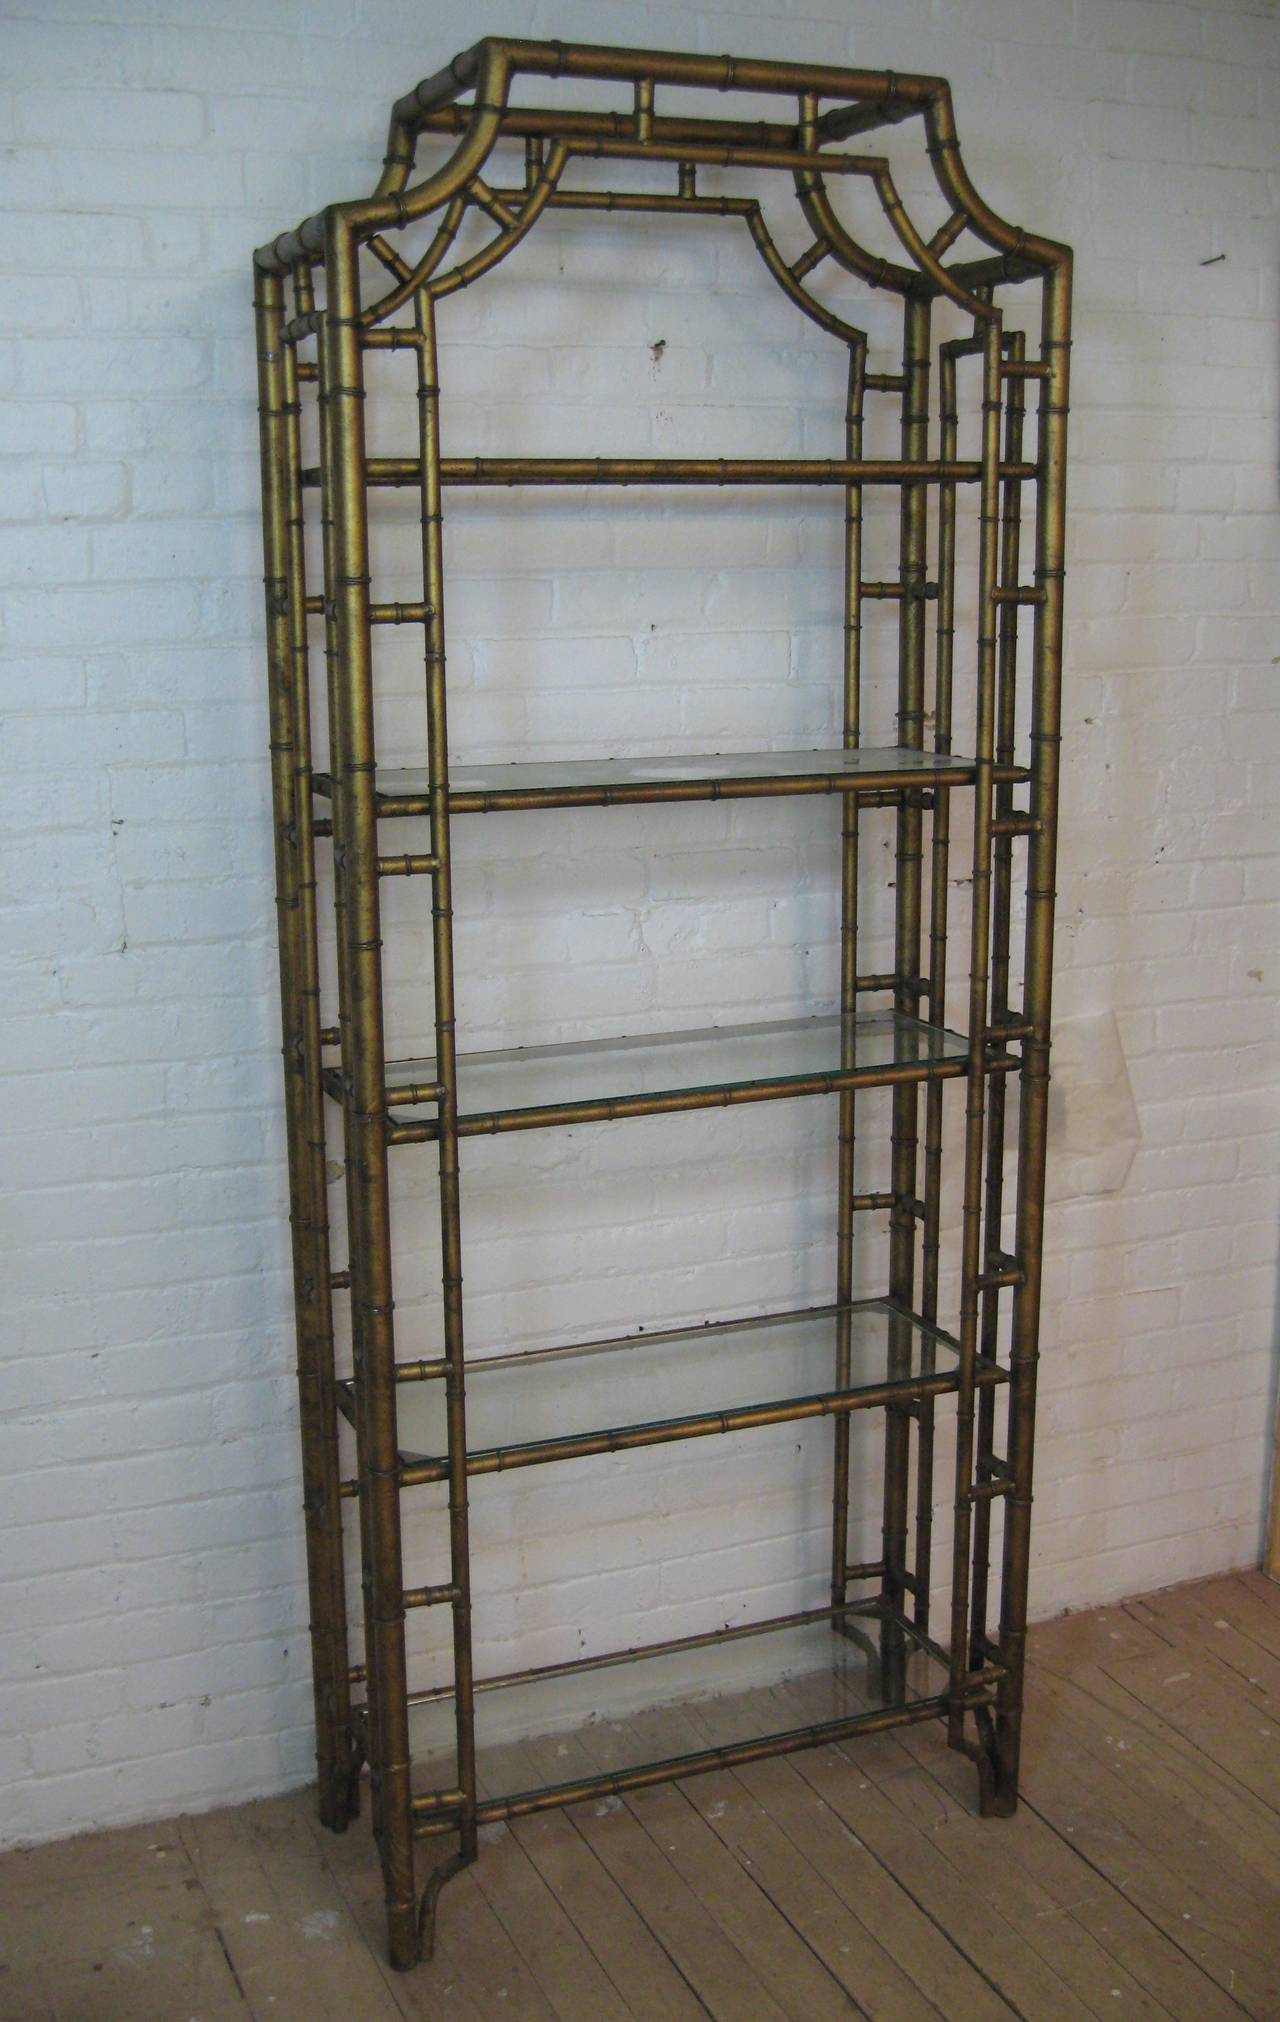 Elegant Chinese Chippendale style glass and metal etagere. Gilded and aged metal frame holds five glass shelves.